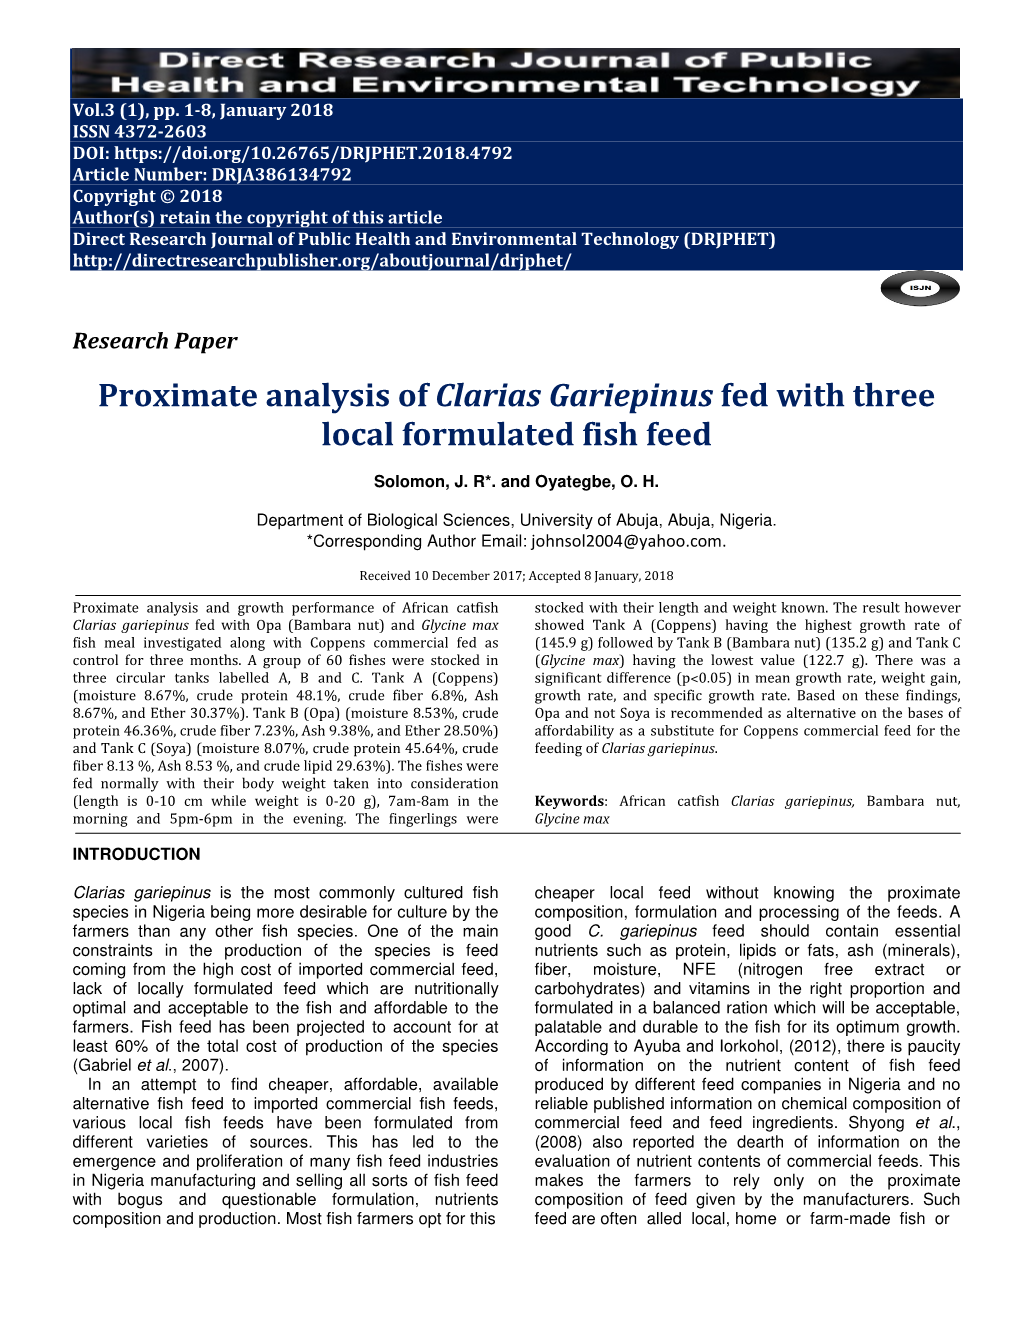 Proximate Analysis of Clarias Gariepinus Fed with Three Local Formulated Fish Feed